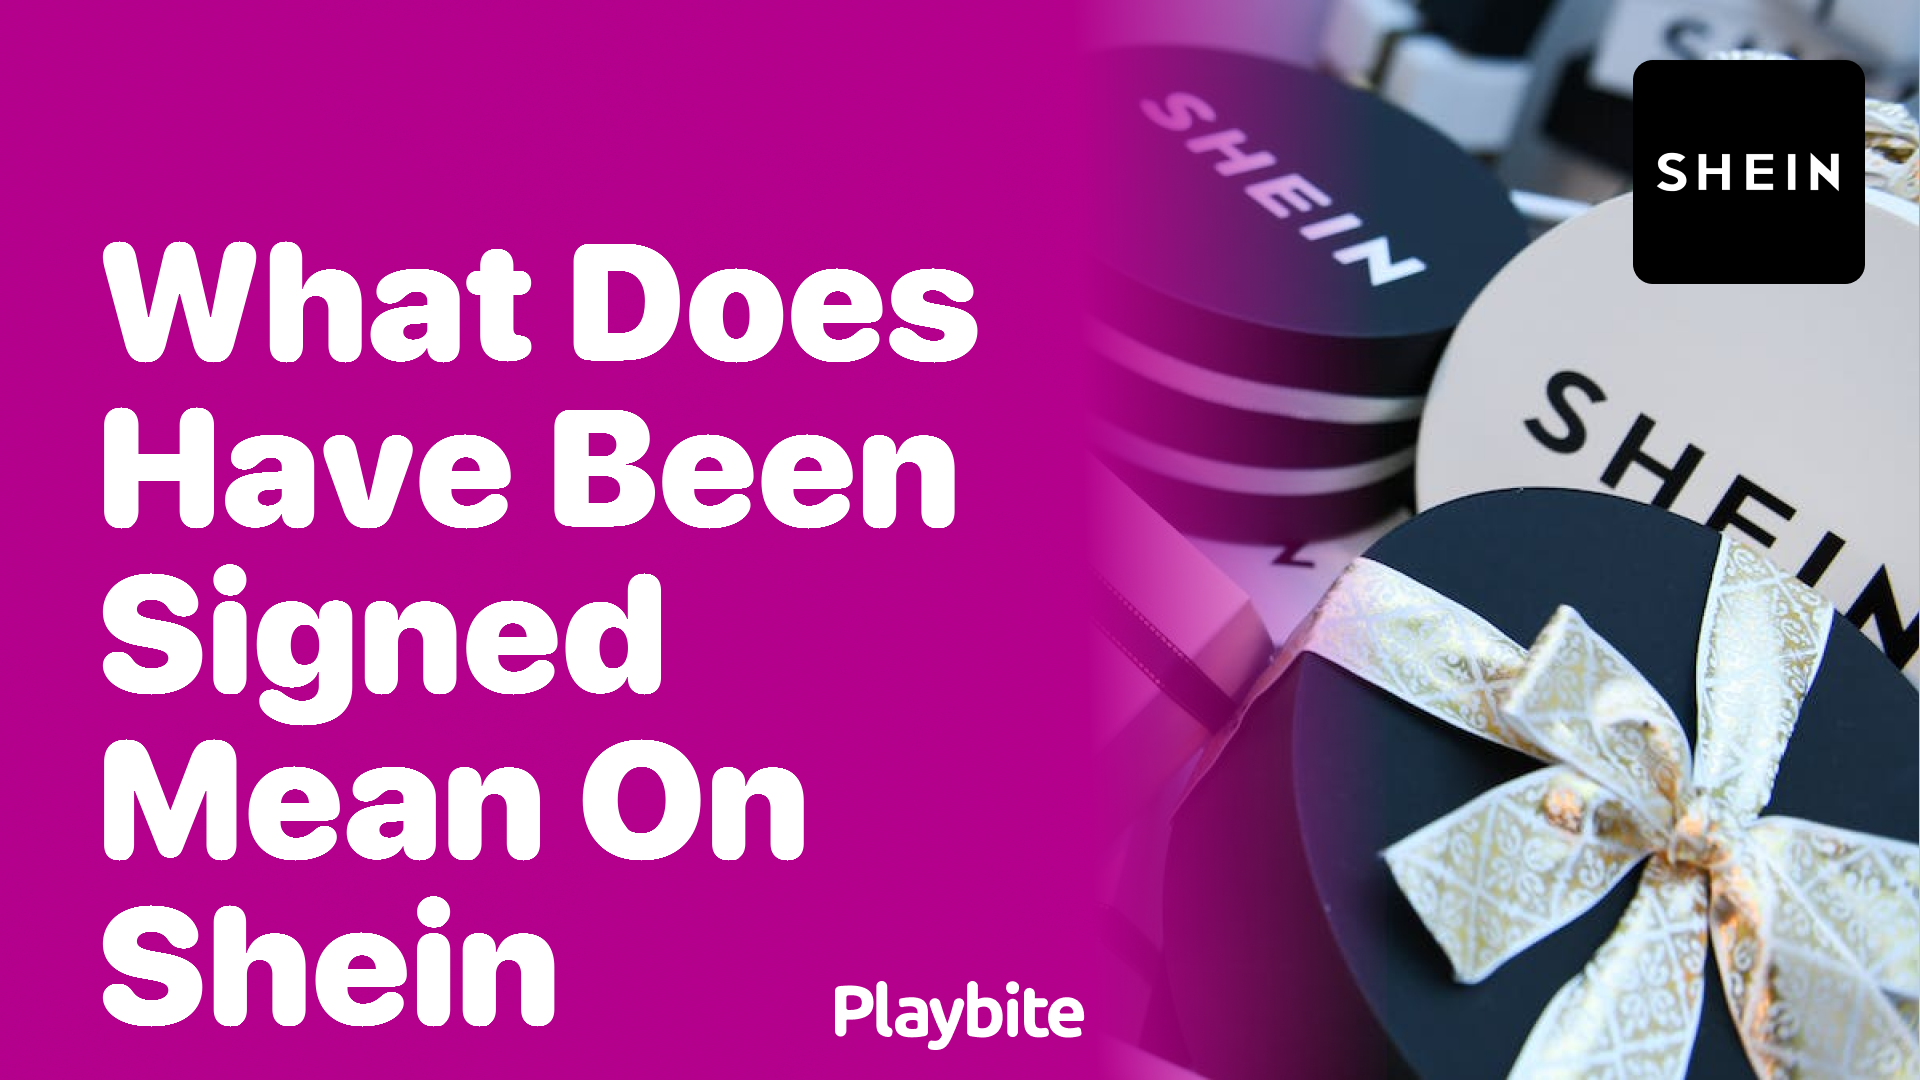 What Does 'Have Been Signed' Mean on SHEIN? - Playbite